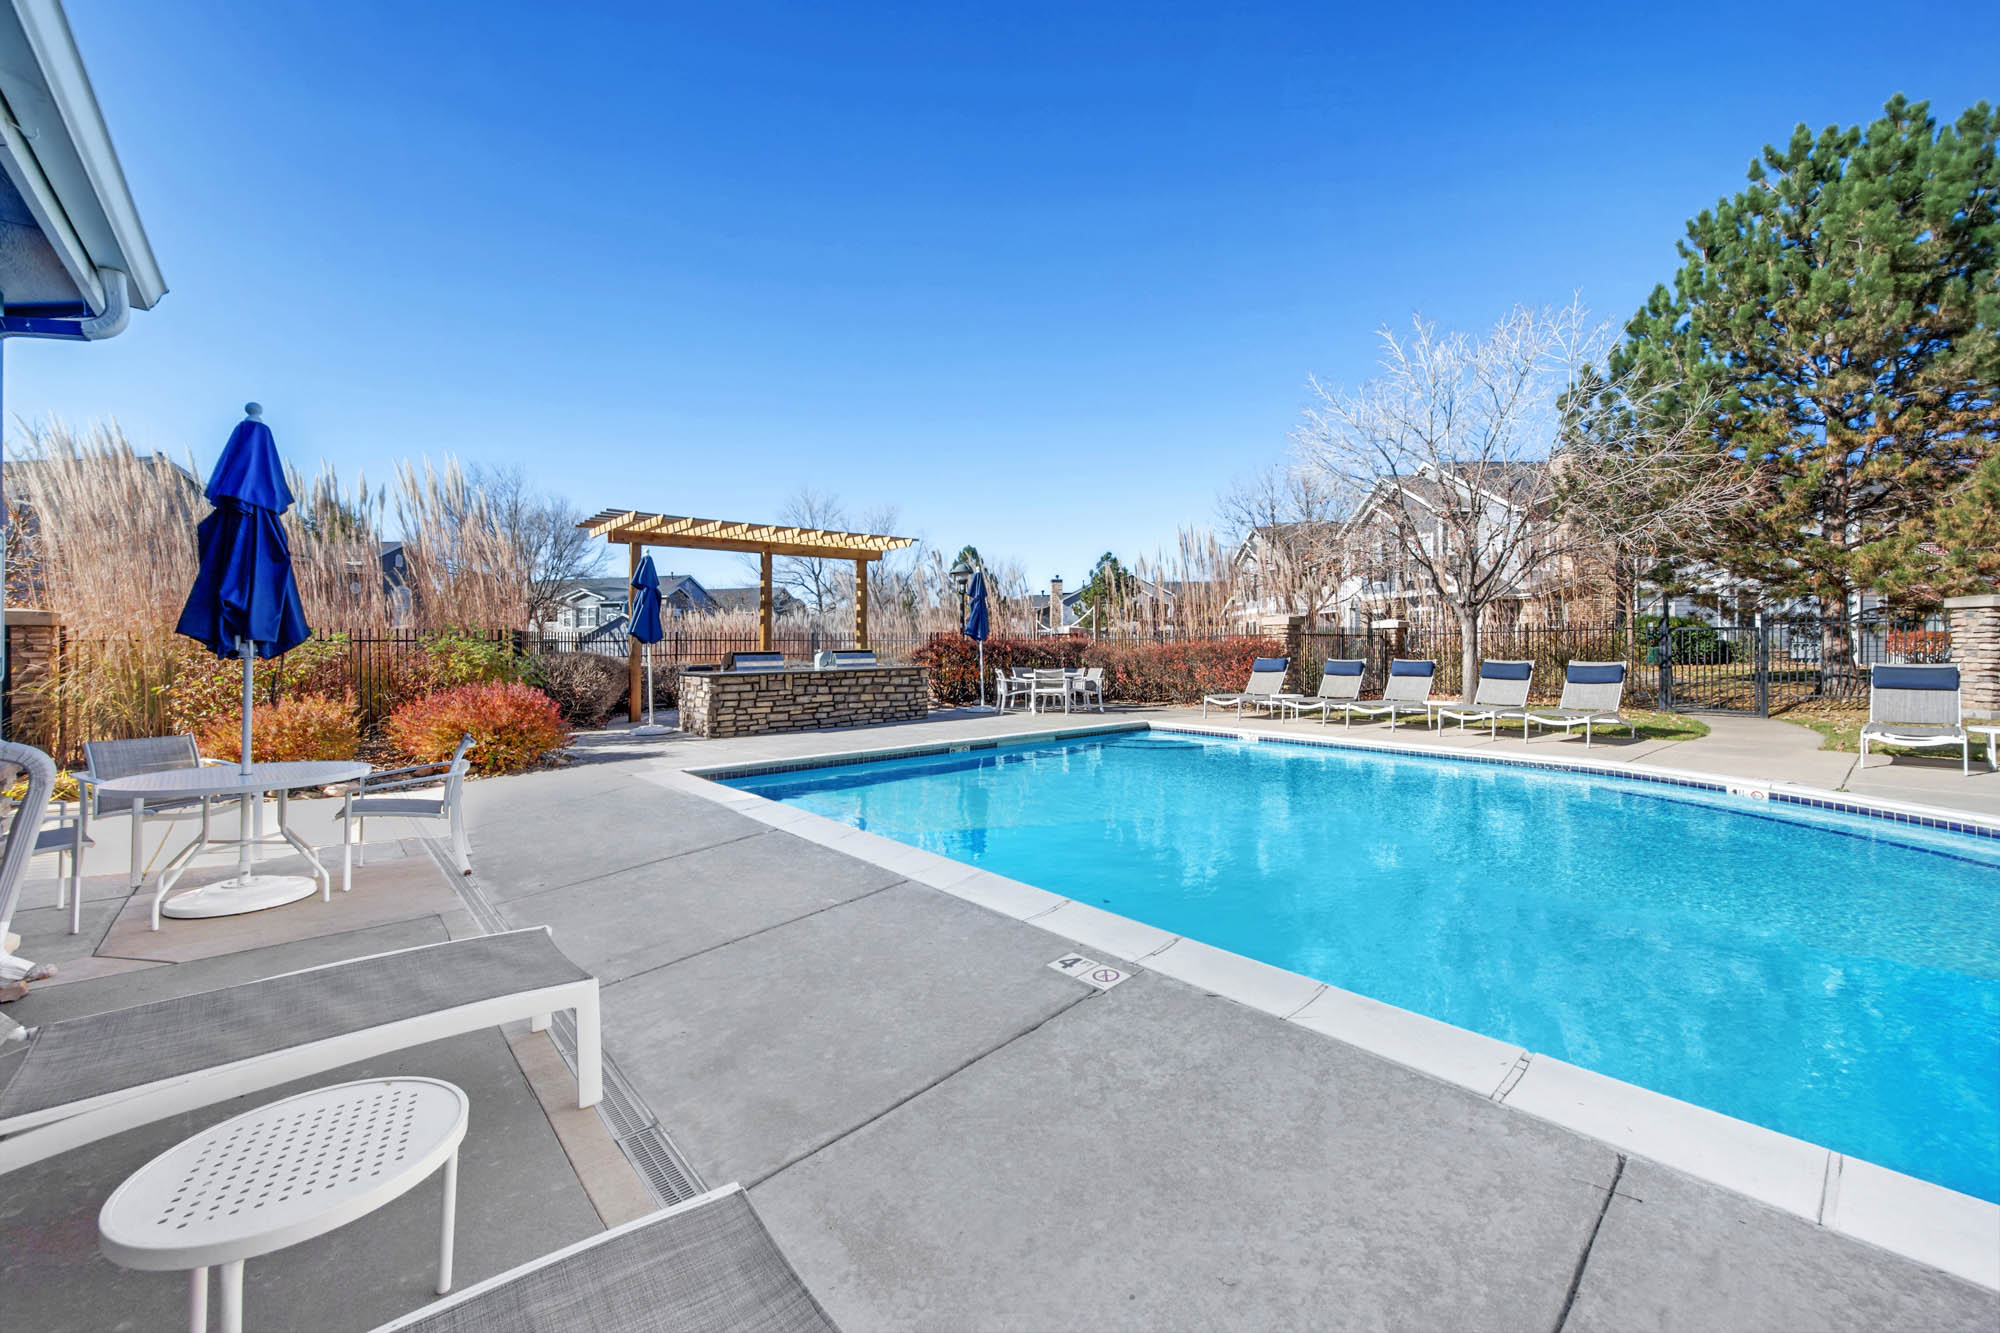 The pool at Eagle Ridge apartments in Denver, CO.